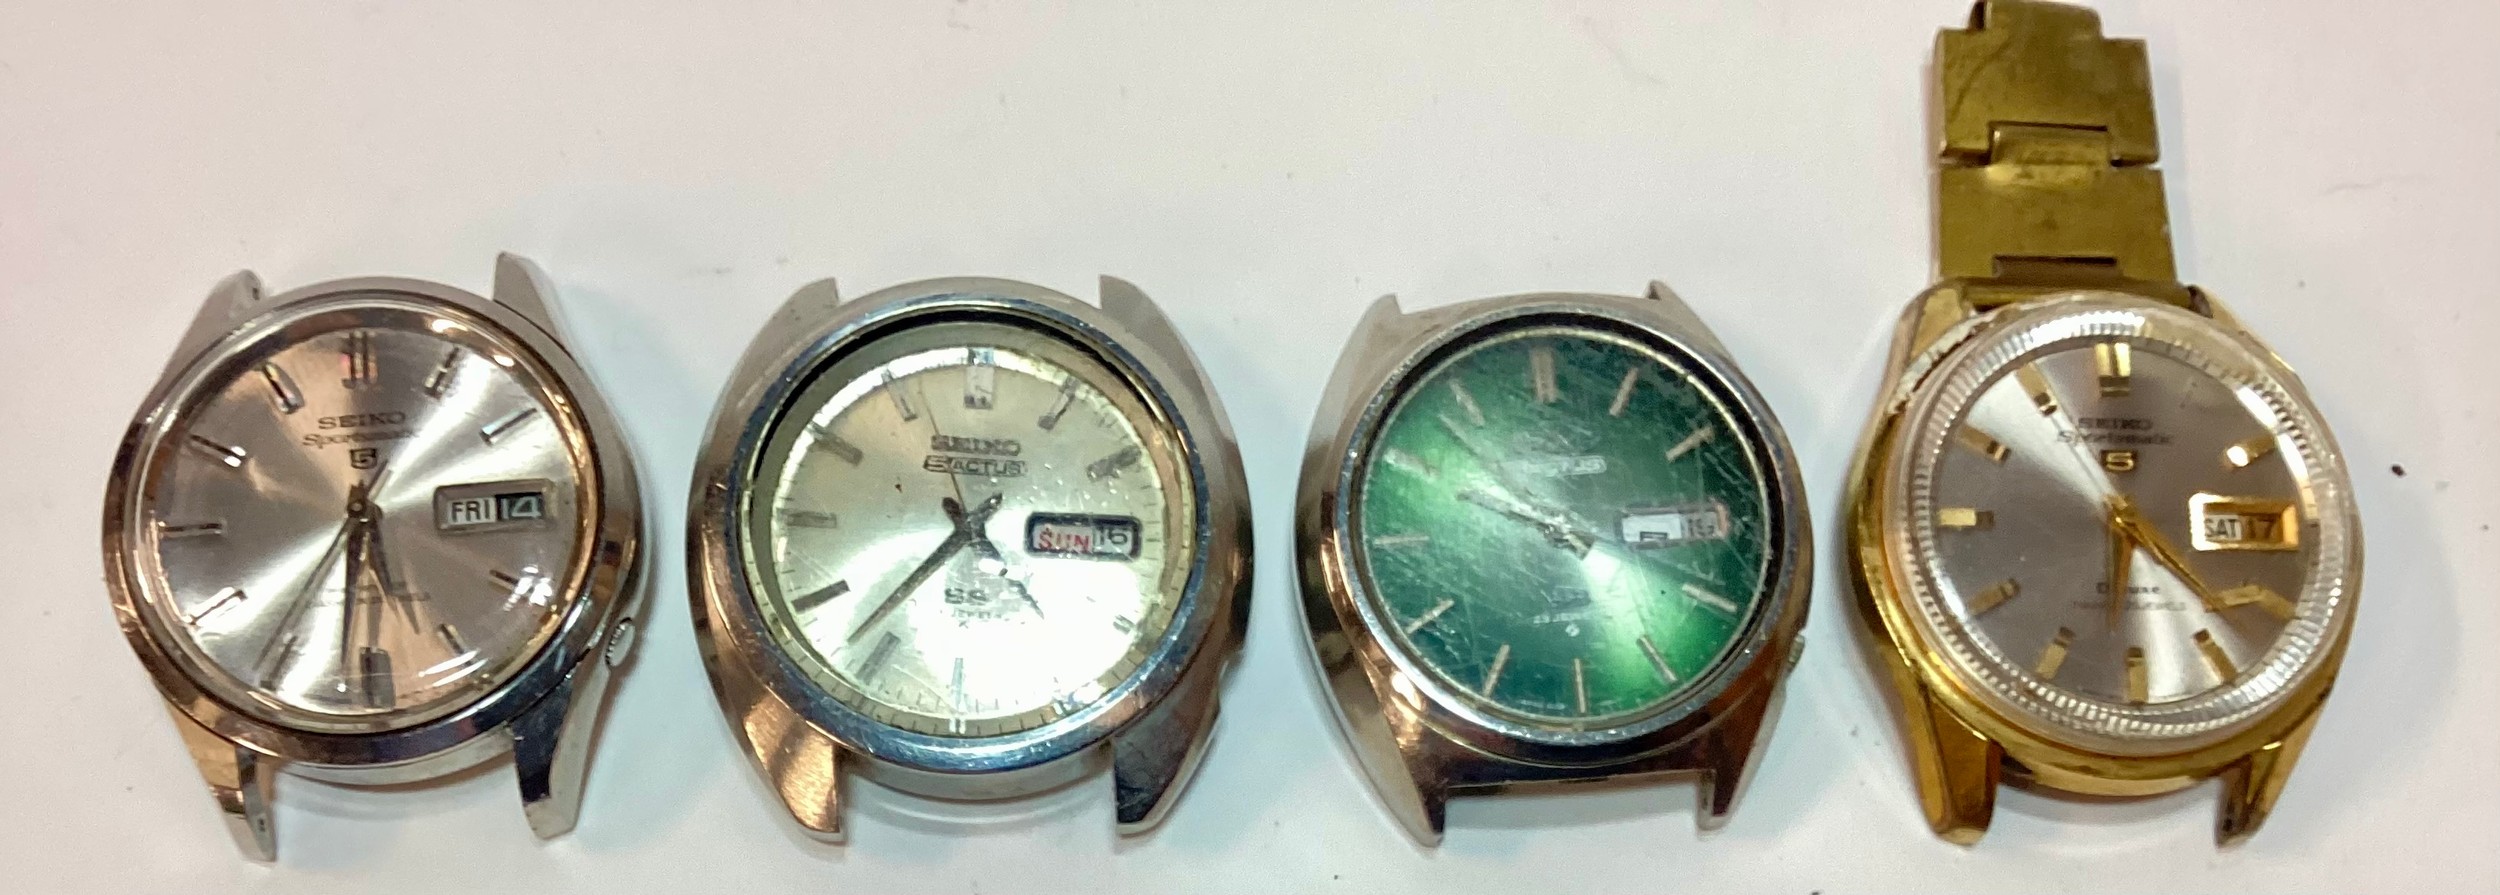 A collection of gents vintage Seiko automatic watches including Actus, Sportsmatic and Marvel - Image 2 of 5